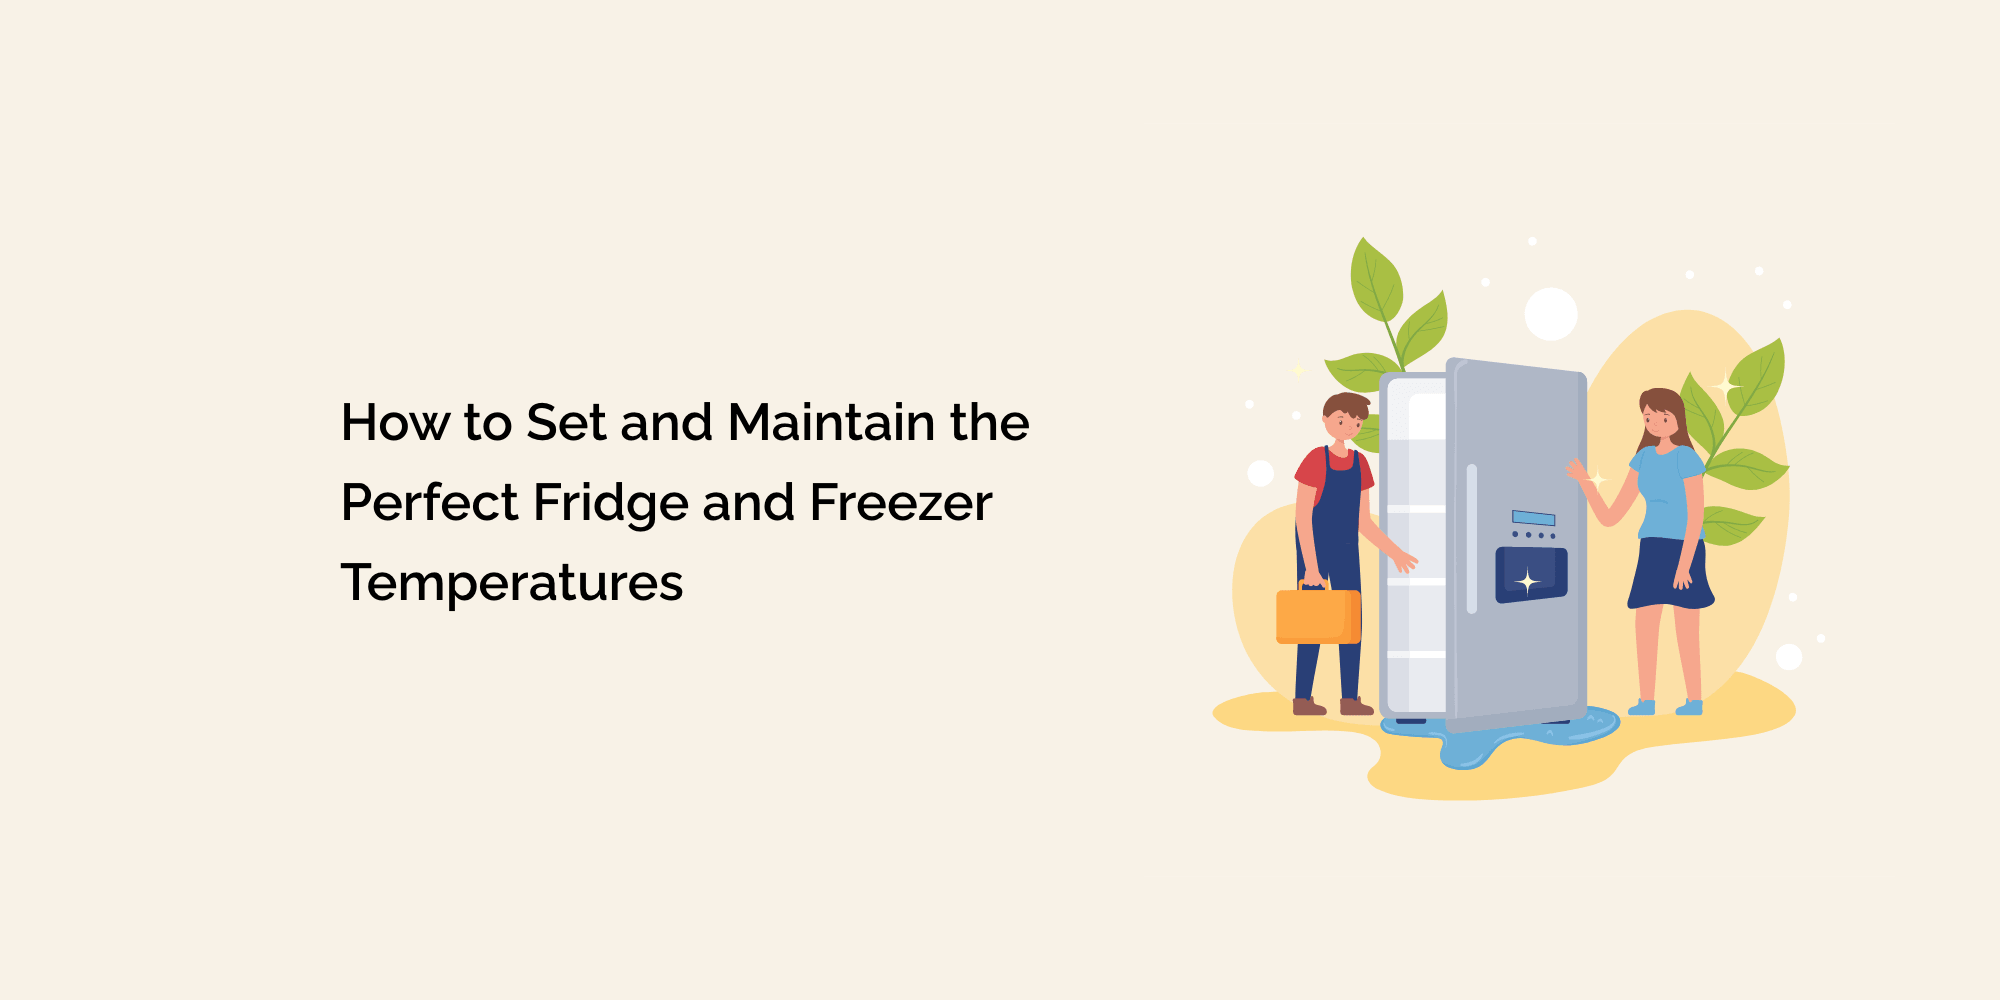 How to Set and Maintain the Perfect Fridge and Freezer Temperatures